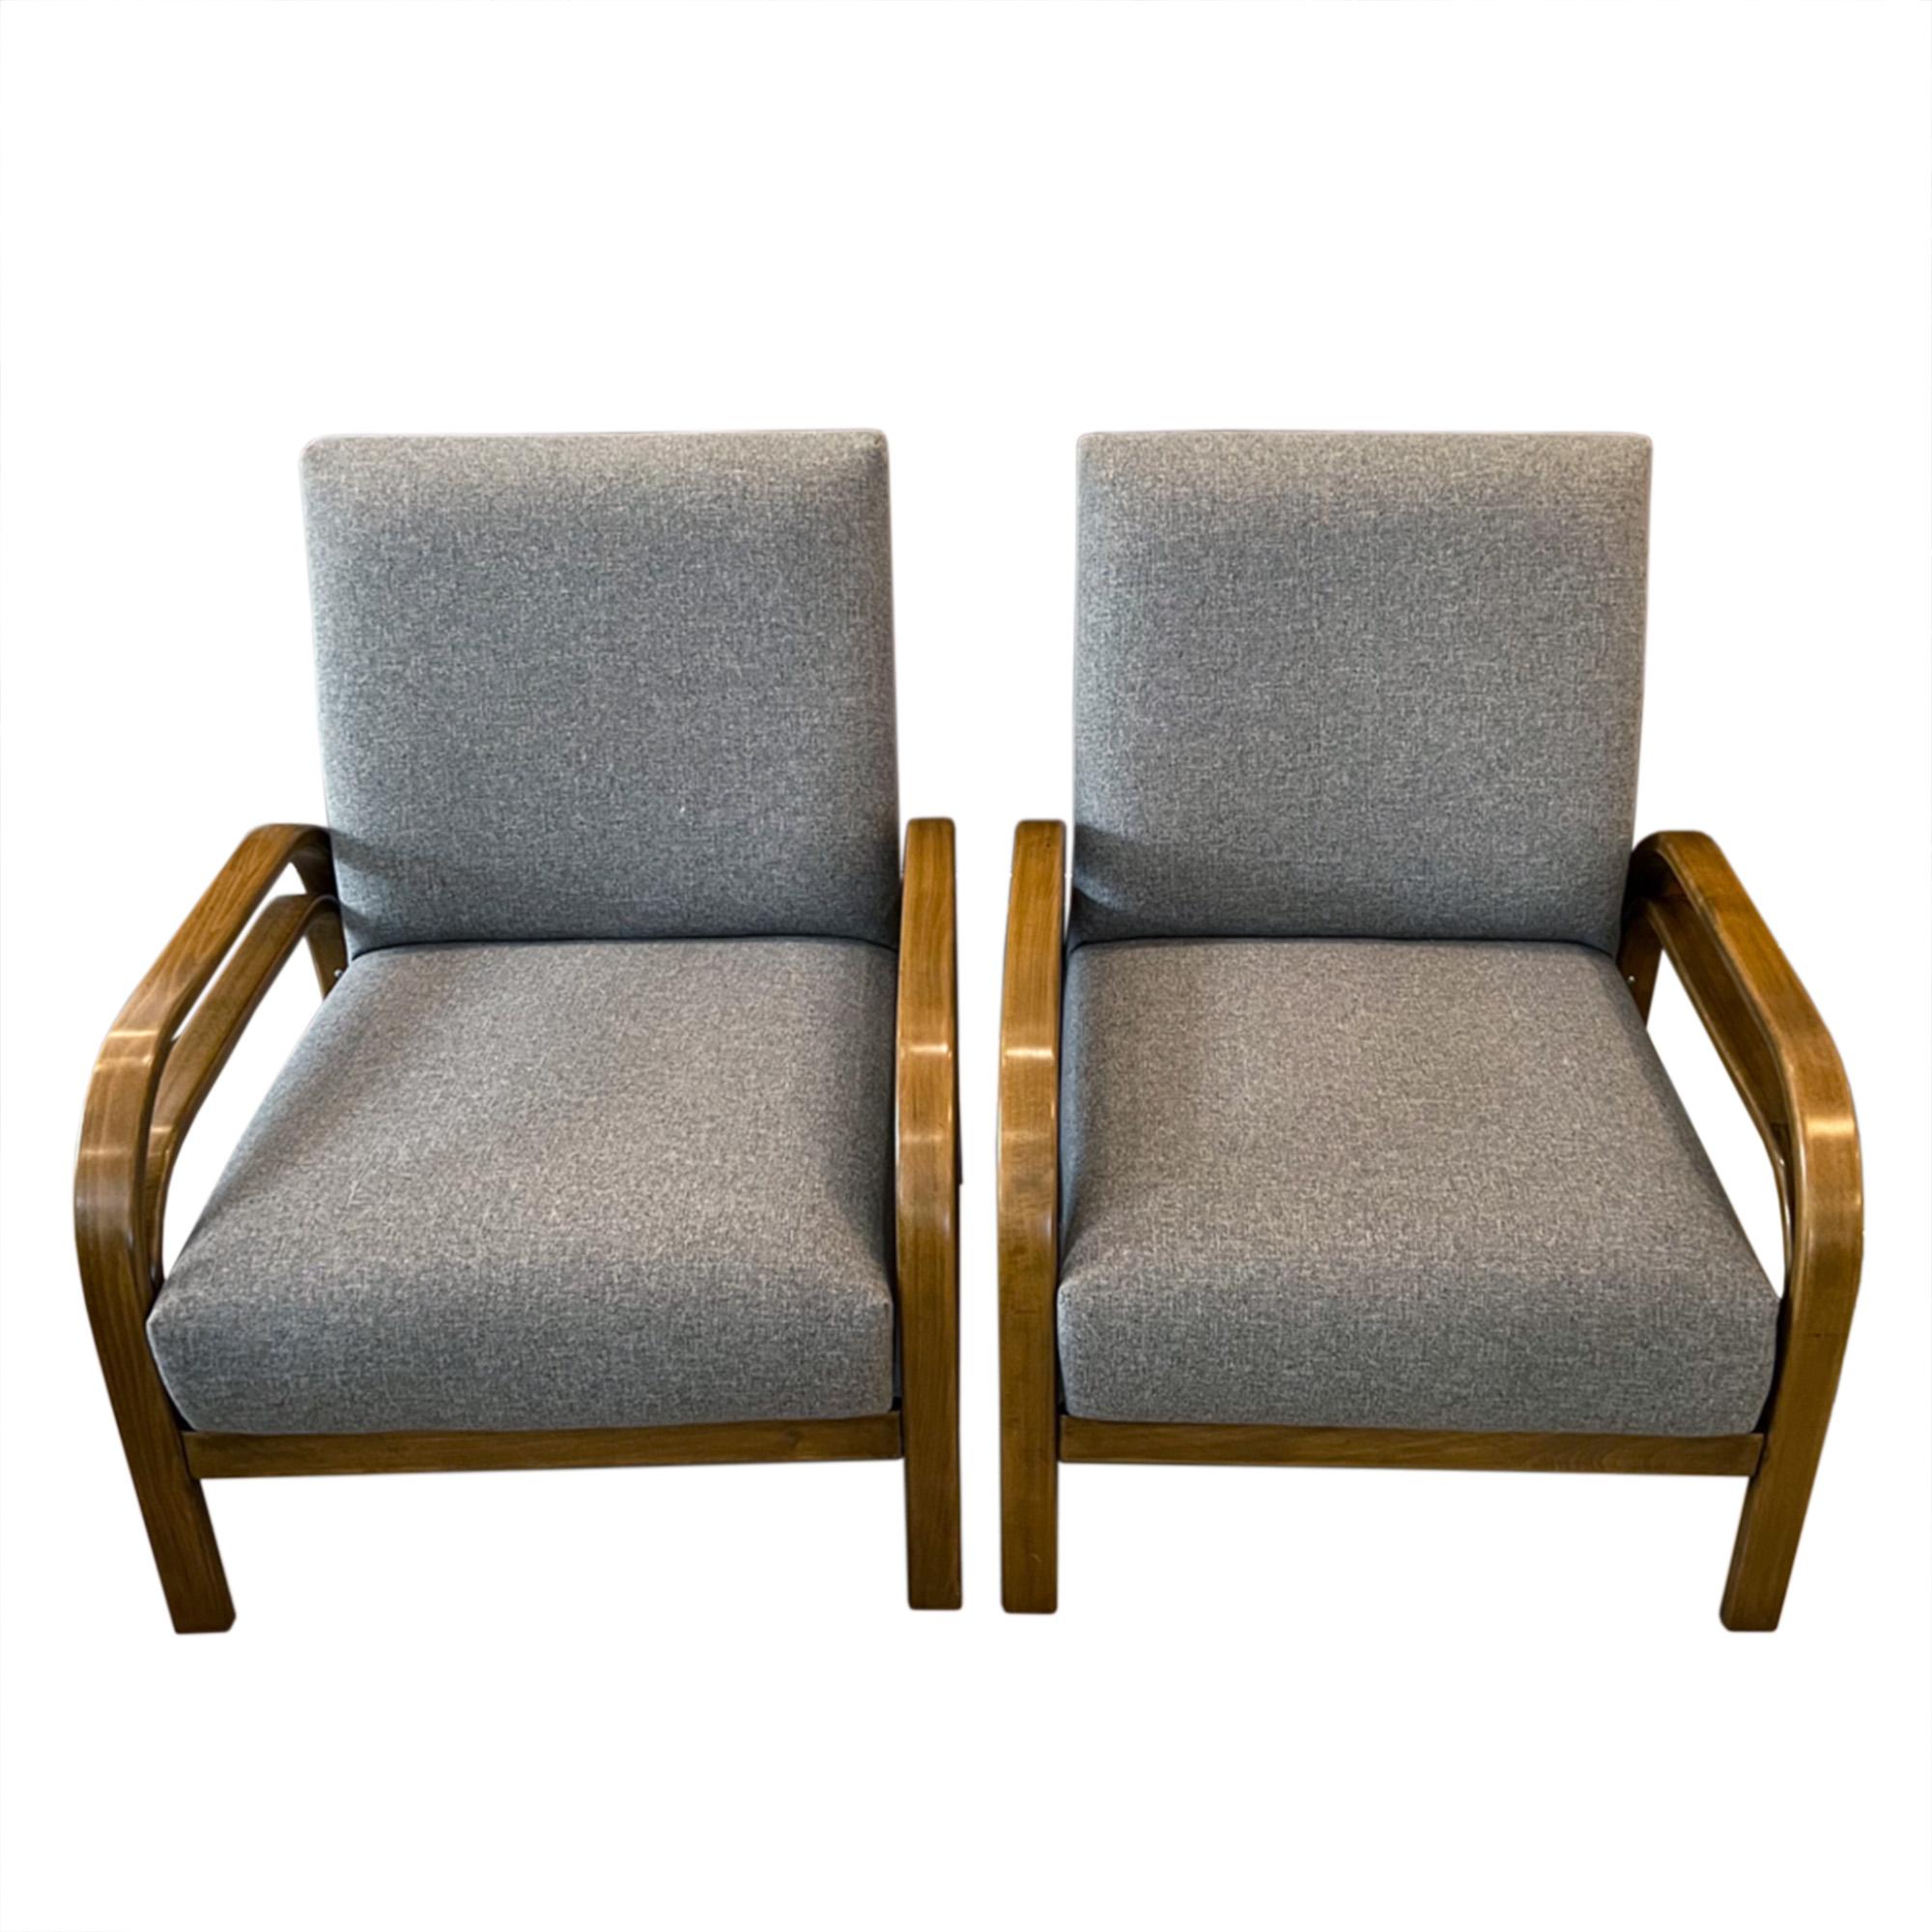 A really stylish, comfortable pair of mid century chairs, reupholstered in luxurious wool fabric.

These chairs were crafted in what was then Czechoslovakia in the 1950s, the bent wood creates elegant deco lines on the arms. 

Seat height is